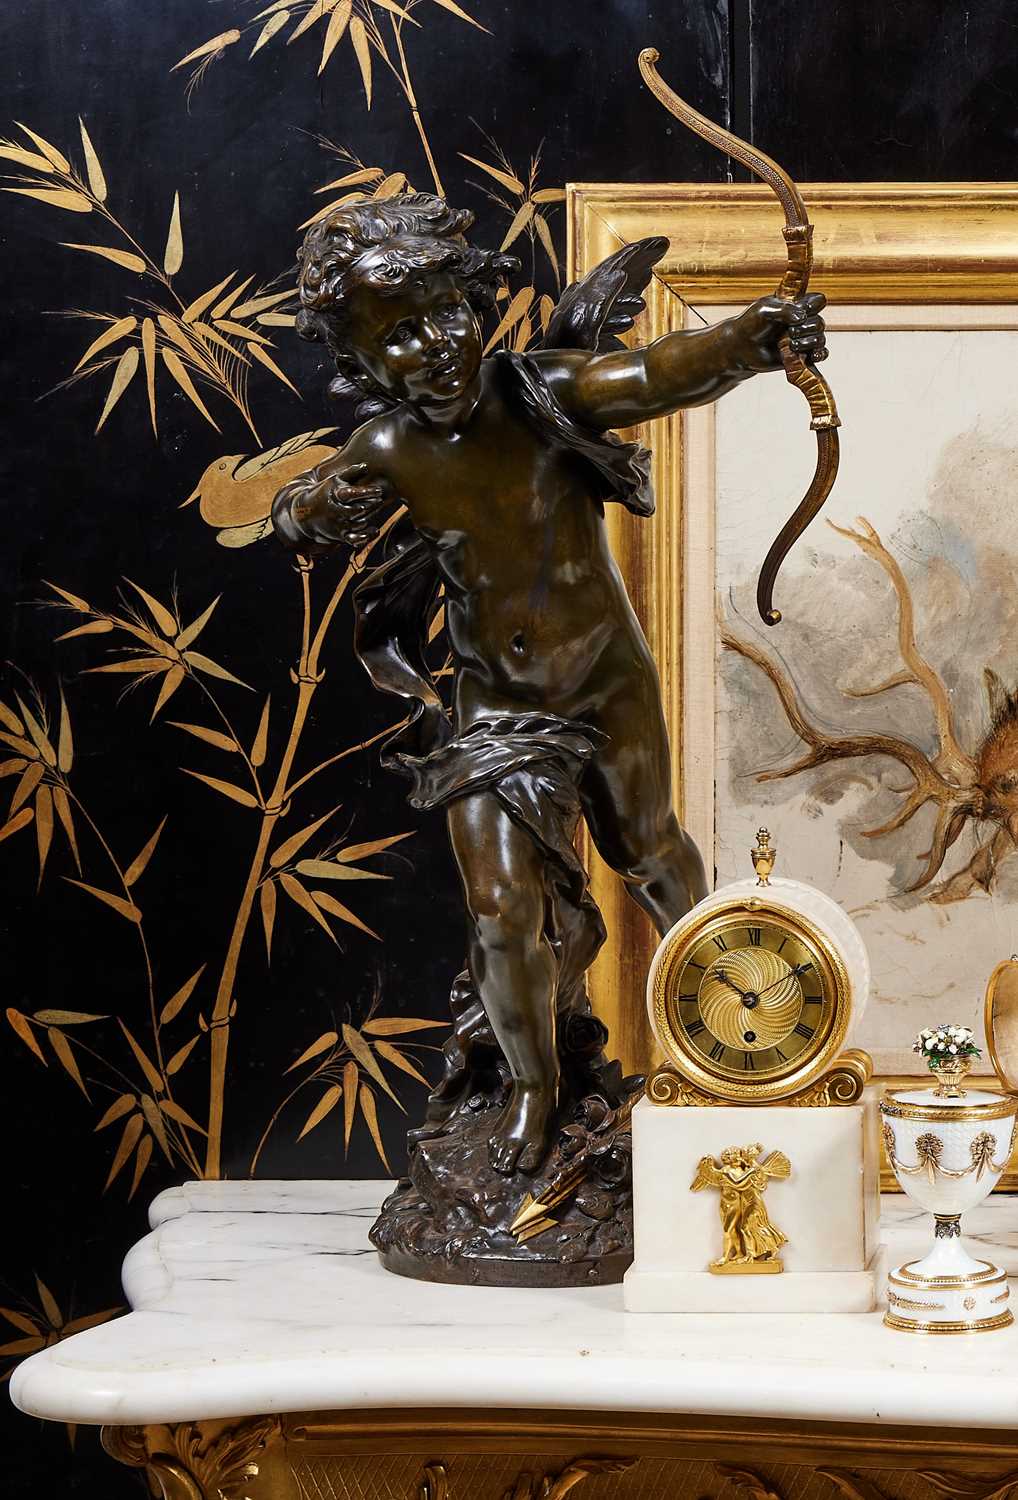 AUGUSTE MOREAU (FRENCH, 1834-1917): A LARGE BRONZE FIGURE OF CUPID WITH HIS BOW